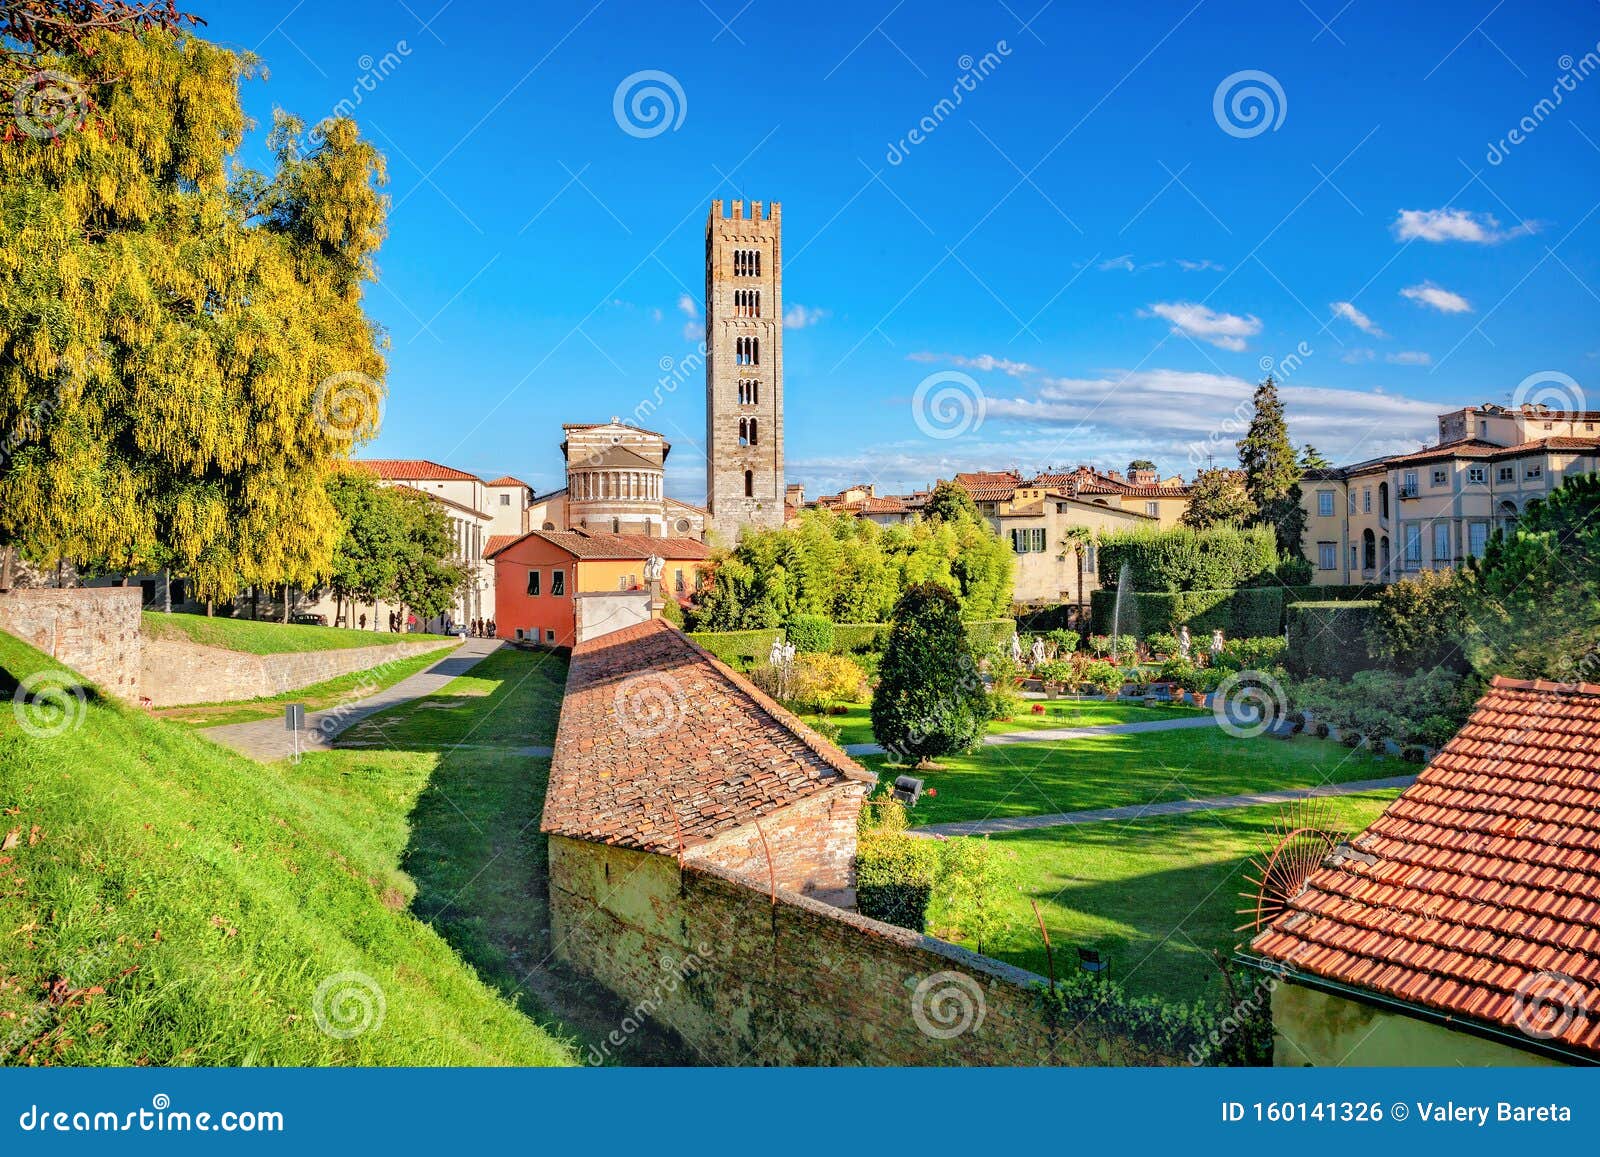 basilica di san frediano and gardens of palazzo pfanner in lucca.tuscany, italy